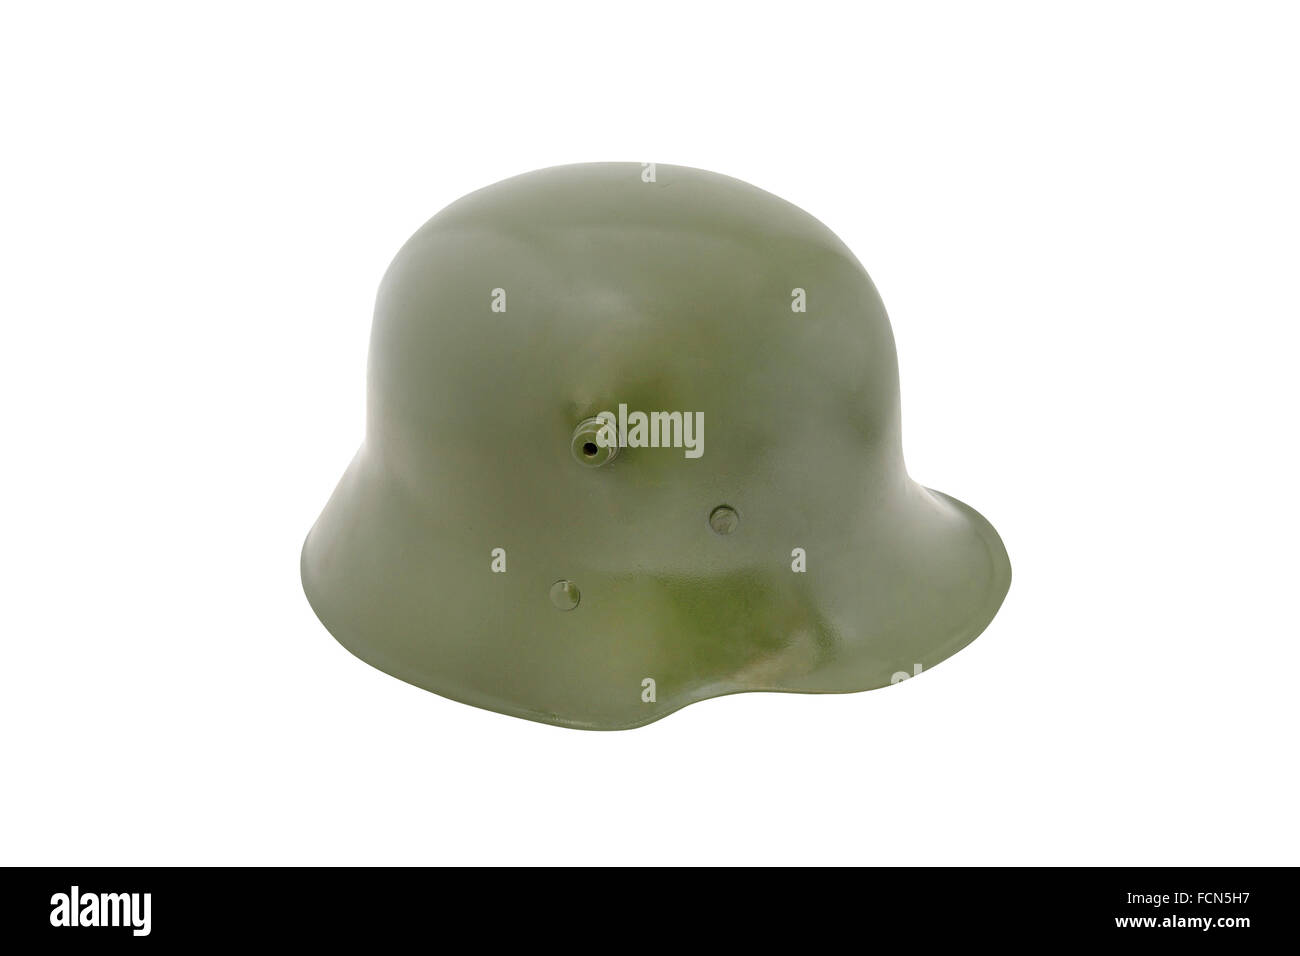 German army helmet (model M18) used in the First and the beginning of the Second World Wars on isolated background. Stock Photo